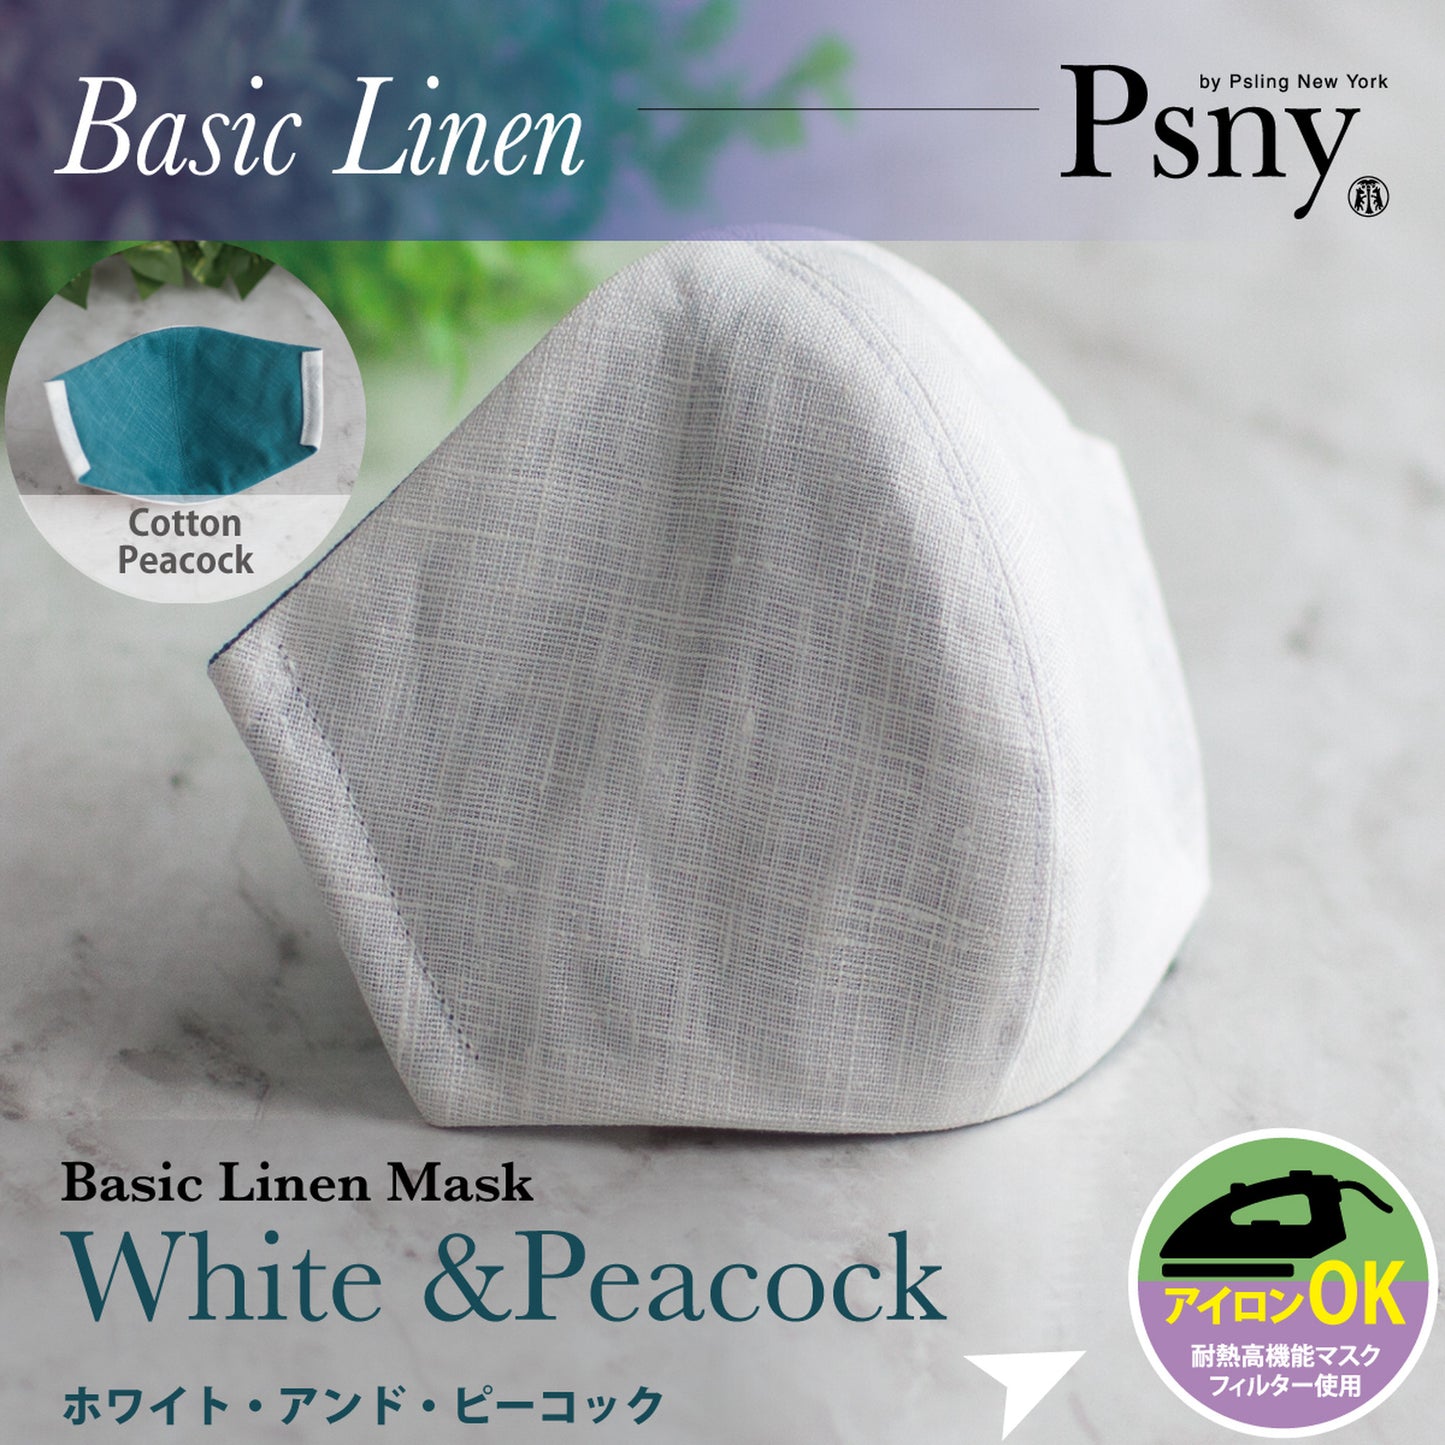 PSNY Free Shipping Basic Linen White &amp; Peacock Hemp Elegant Ceremonial Occasions Cleanliness Beautiful Elegant Commuting Luxury Mask Adult Beauty Pollen Non-Woven Fabric Filter Included 3D Adult Mask -BL08